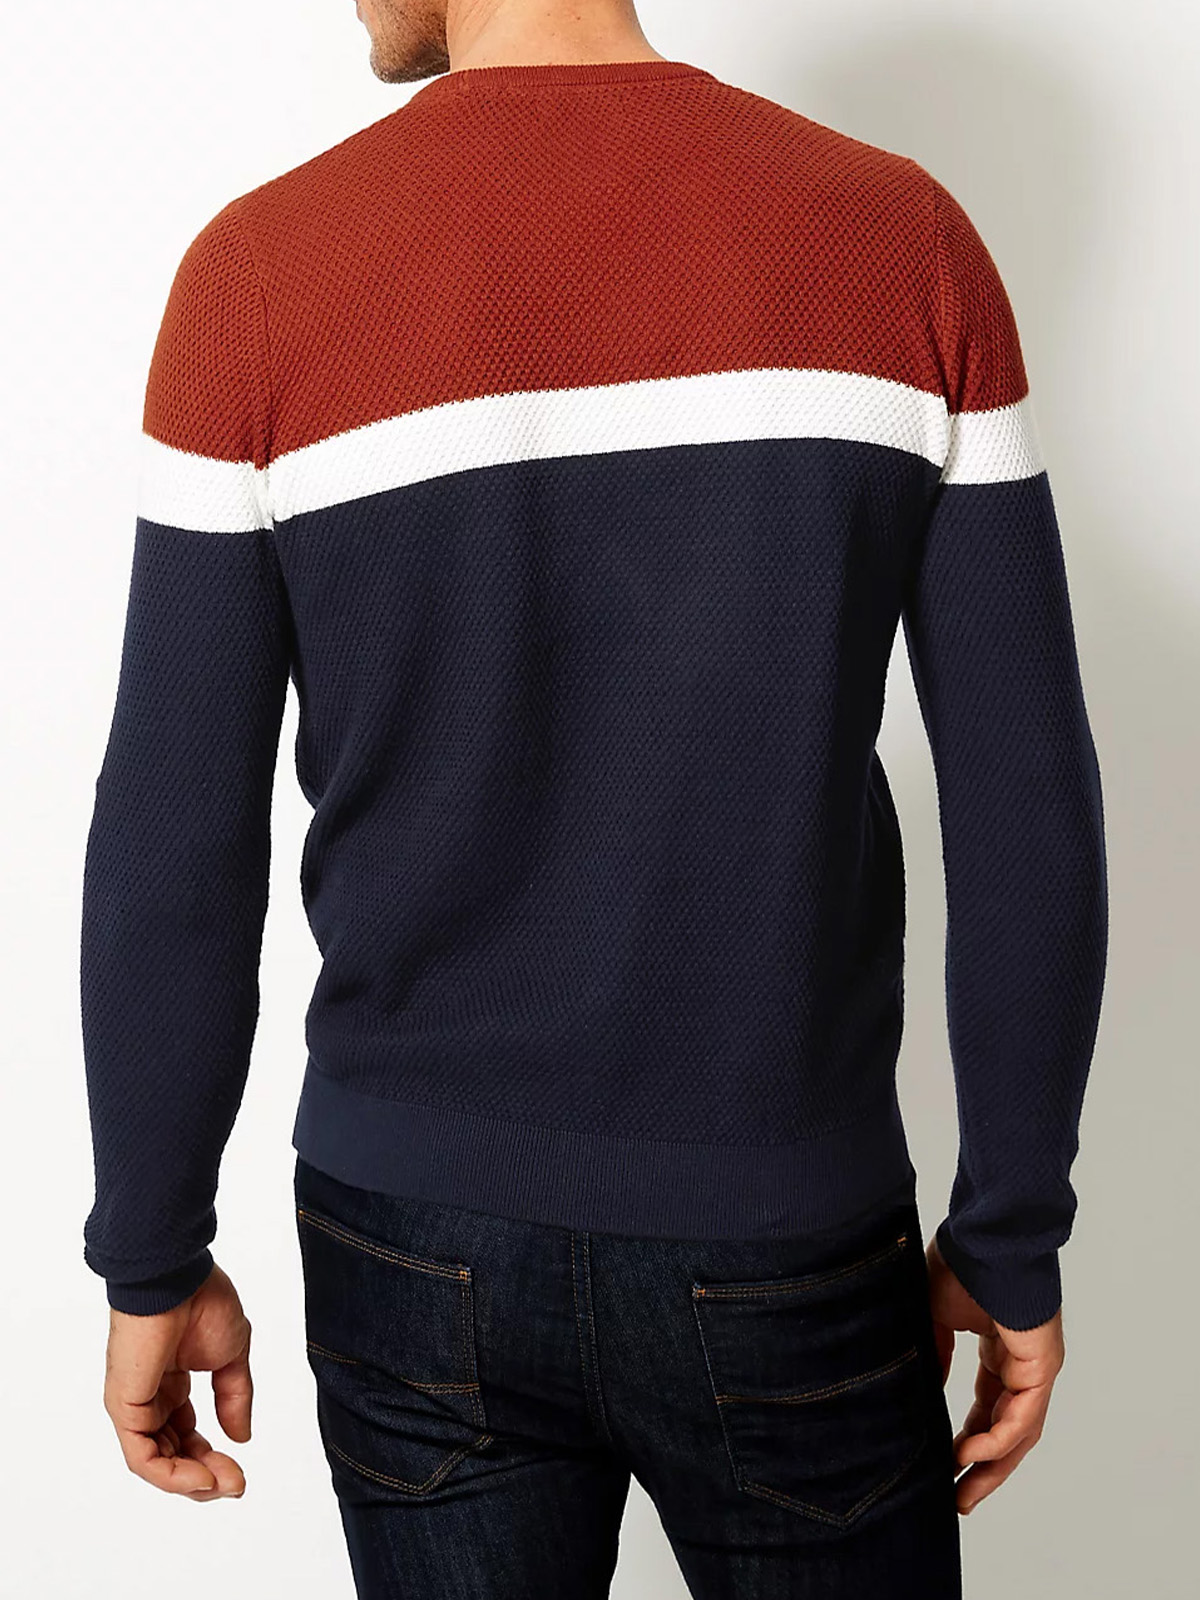 M&S Limited Mens RED MIX Pure Cotton Jumper - Tiqqette Collection